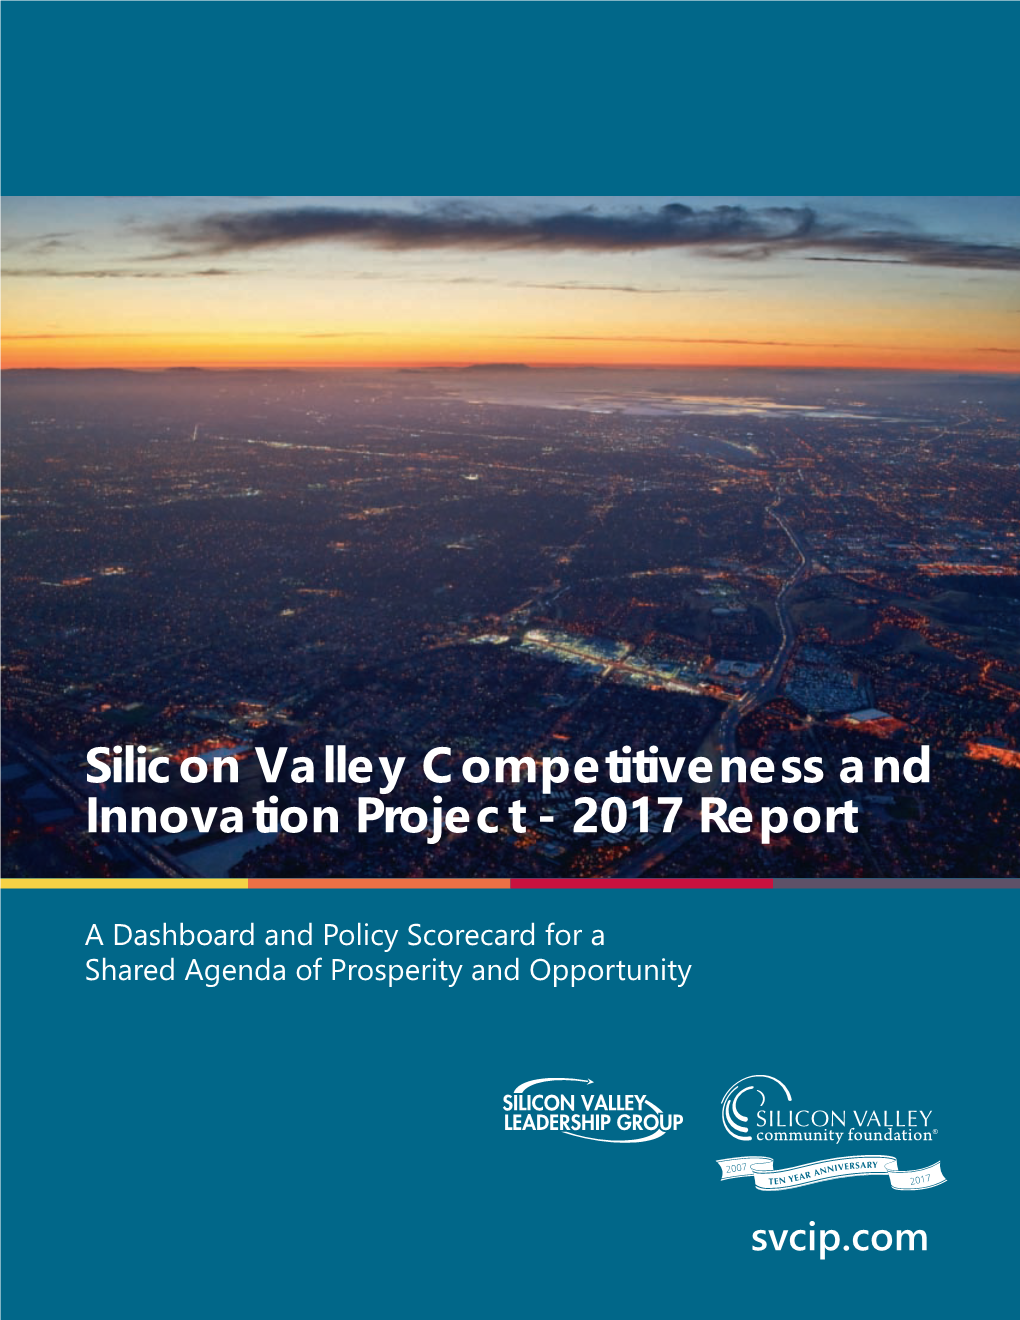 Silicon Valley Competitiveness and Innovation Project - 2017 Report